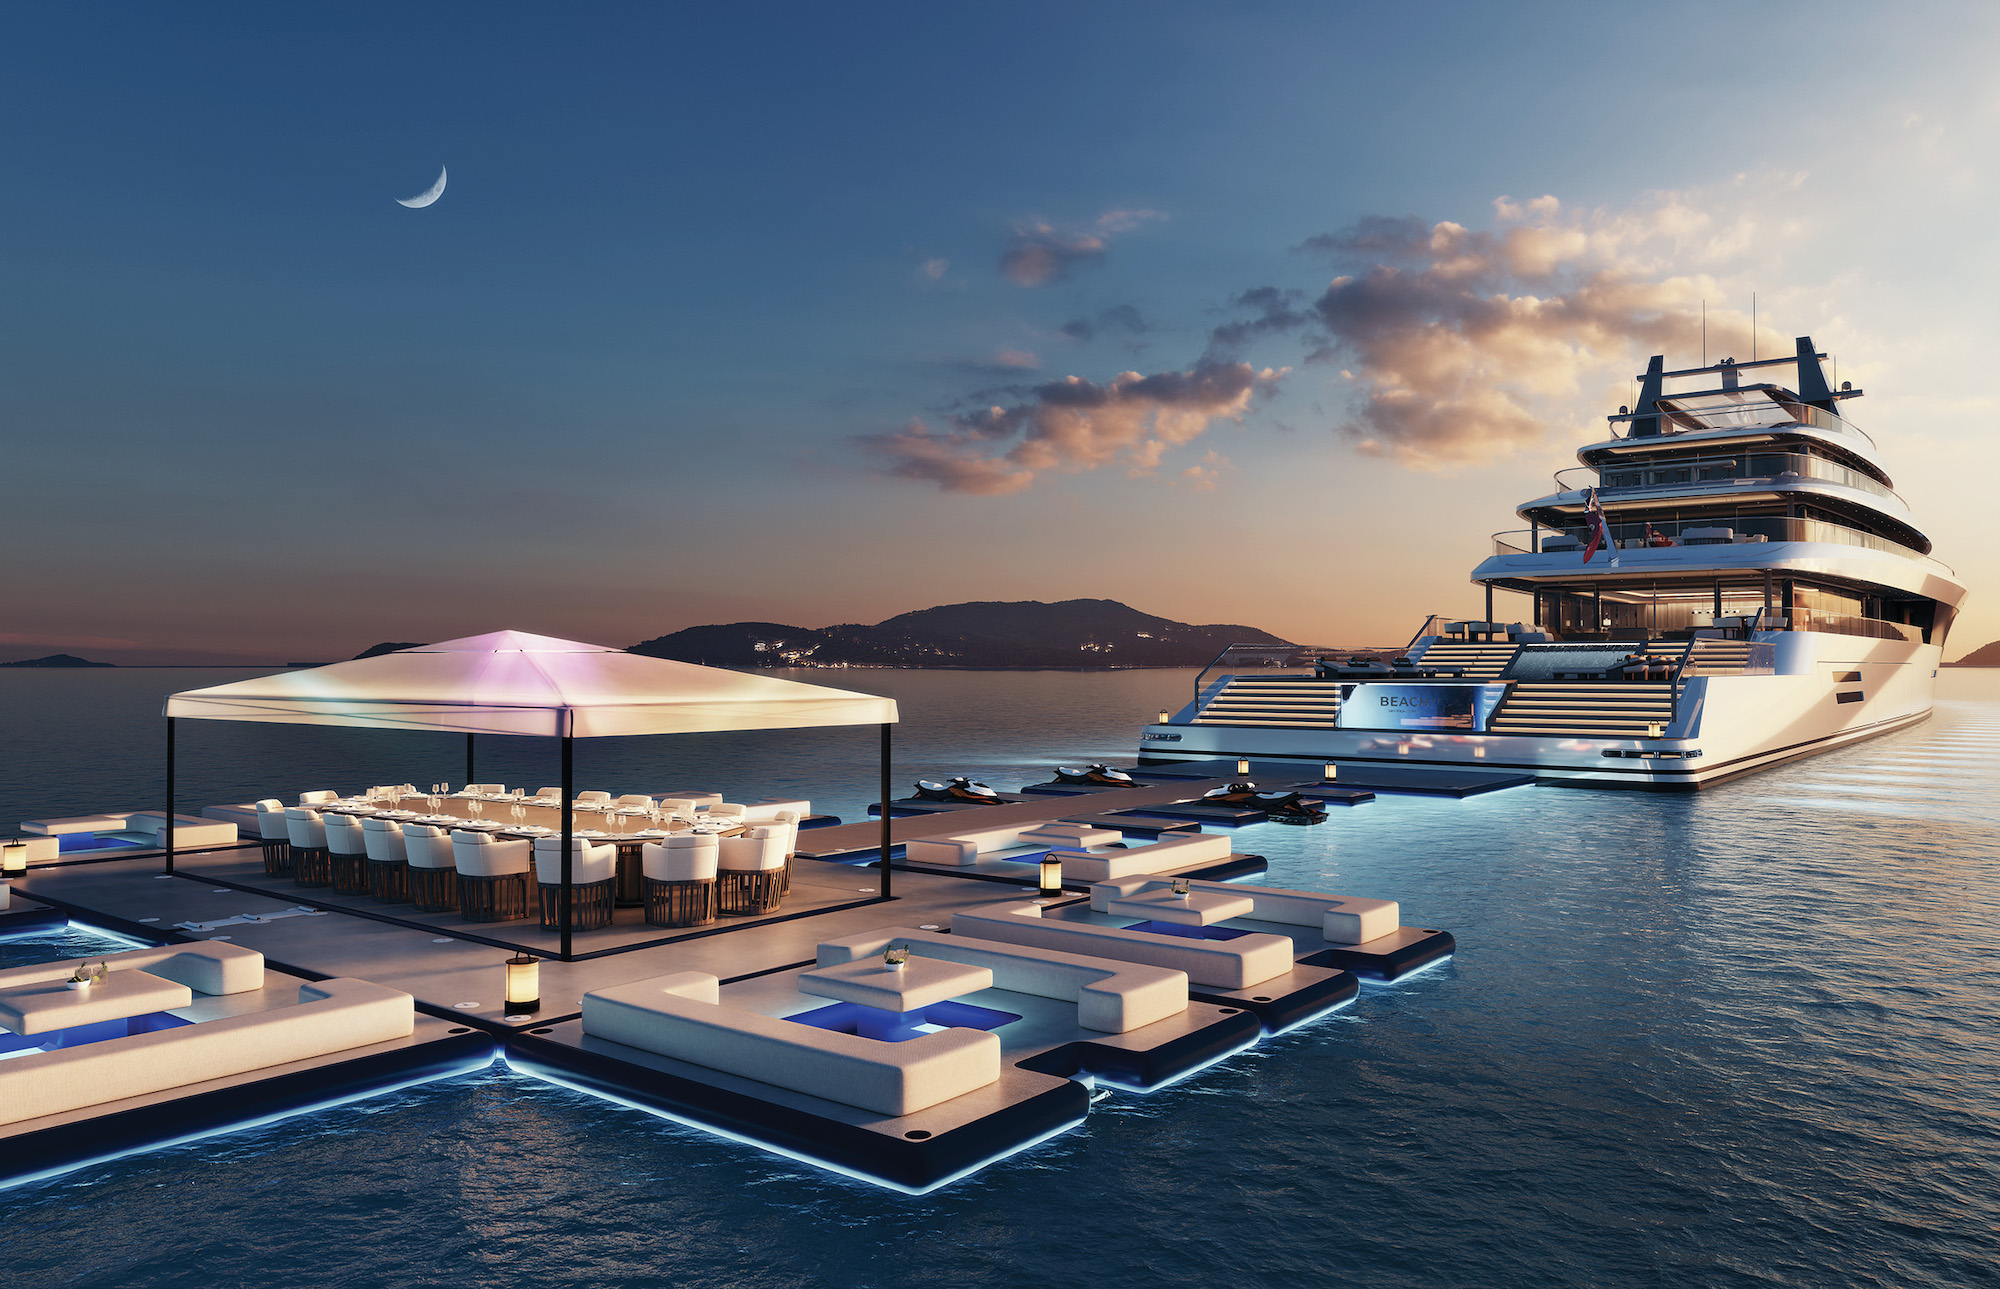 The "floating island" aft of the Beach superyacht concept represents next-generation yacht design - Effect Magazine